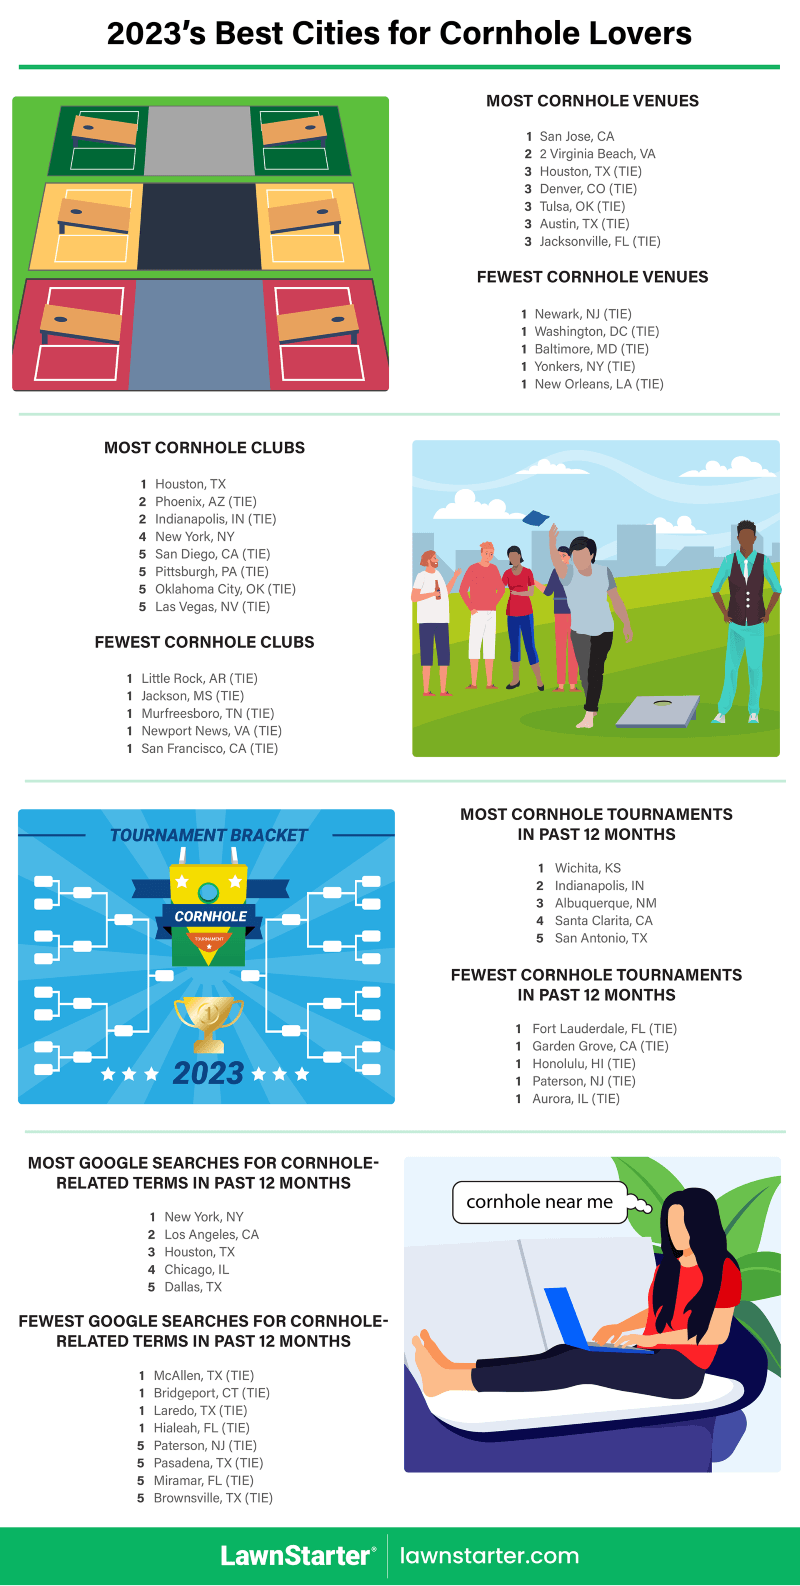 Infographic showing the Best Cities for Cornhole Lovers, a ranking based on cornhole venues, park and yard space, clubs, tournaments, and more